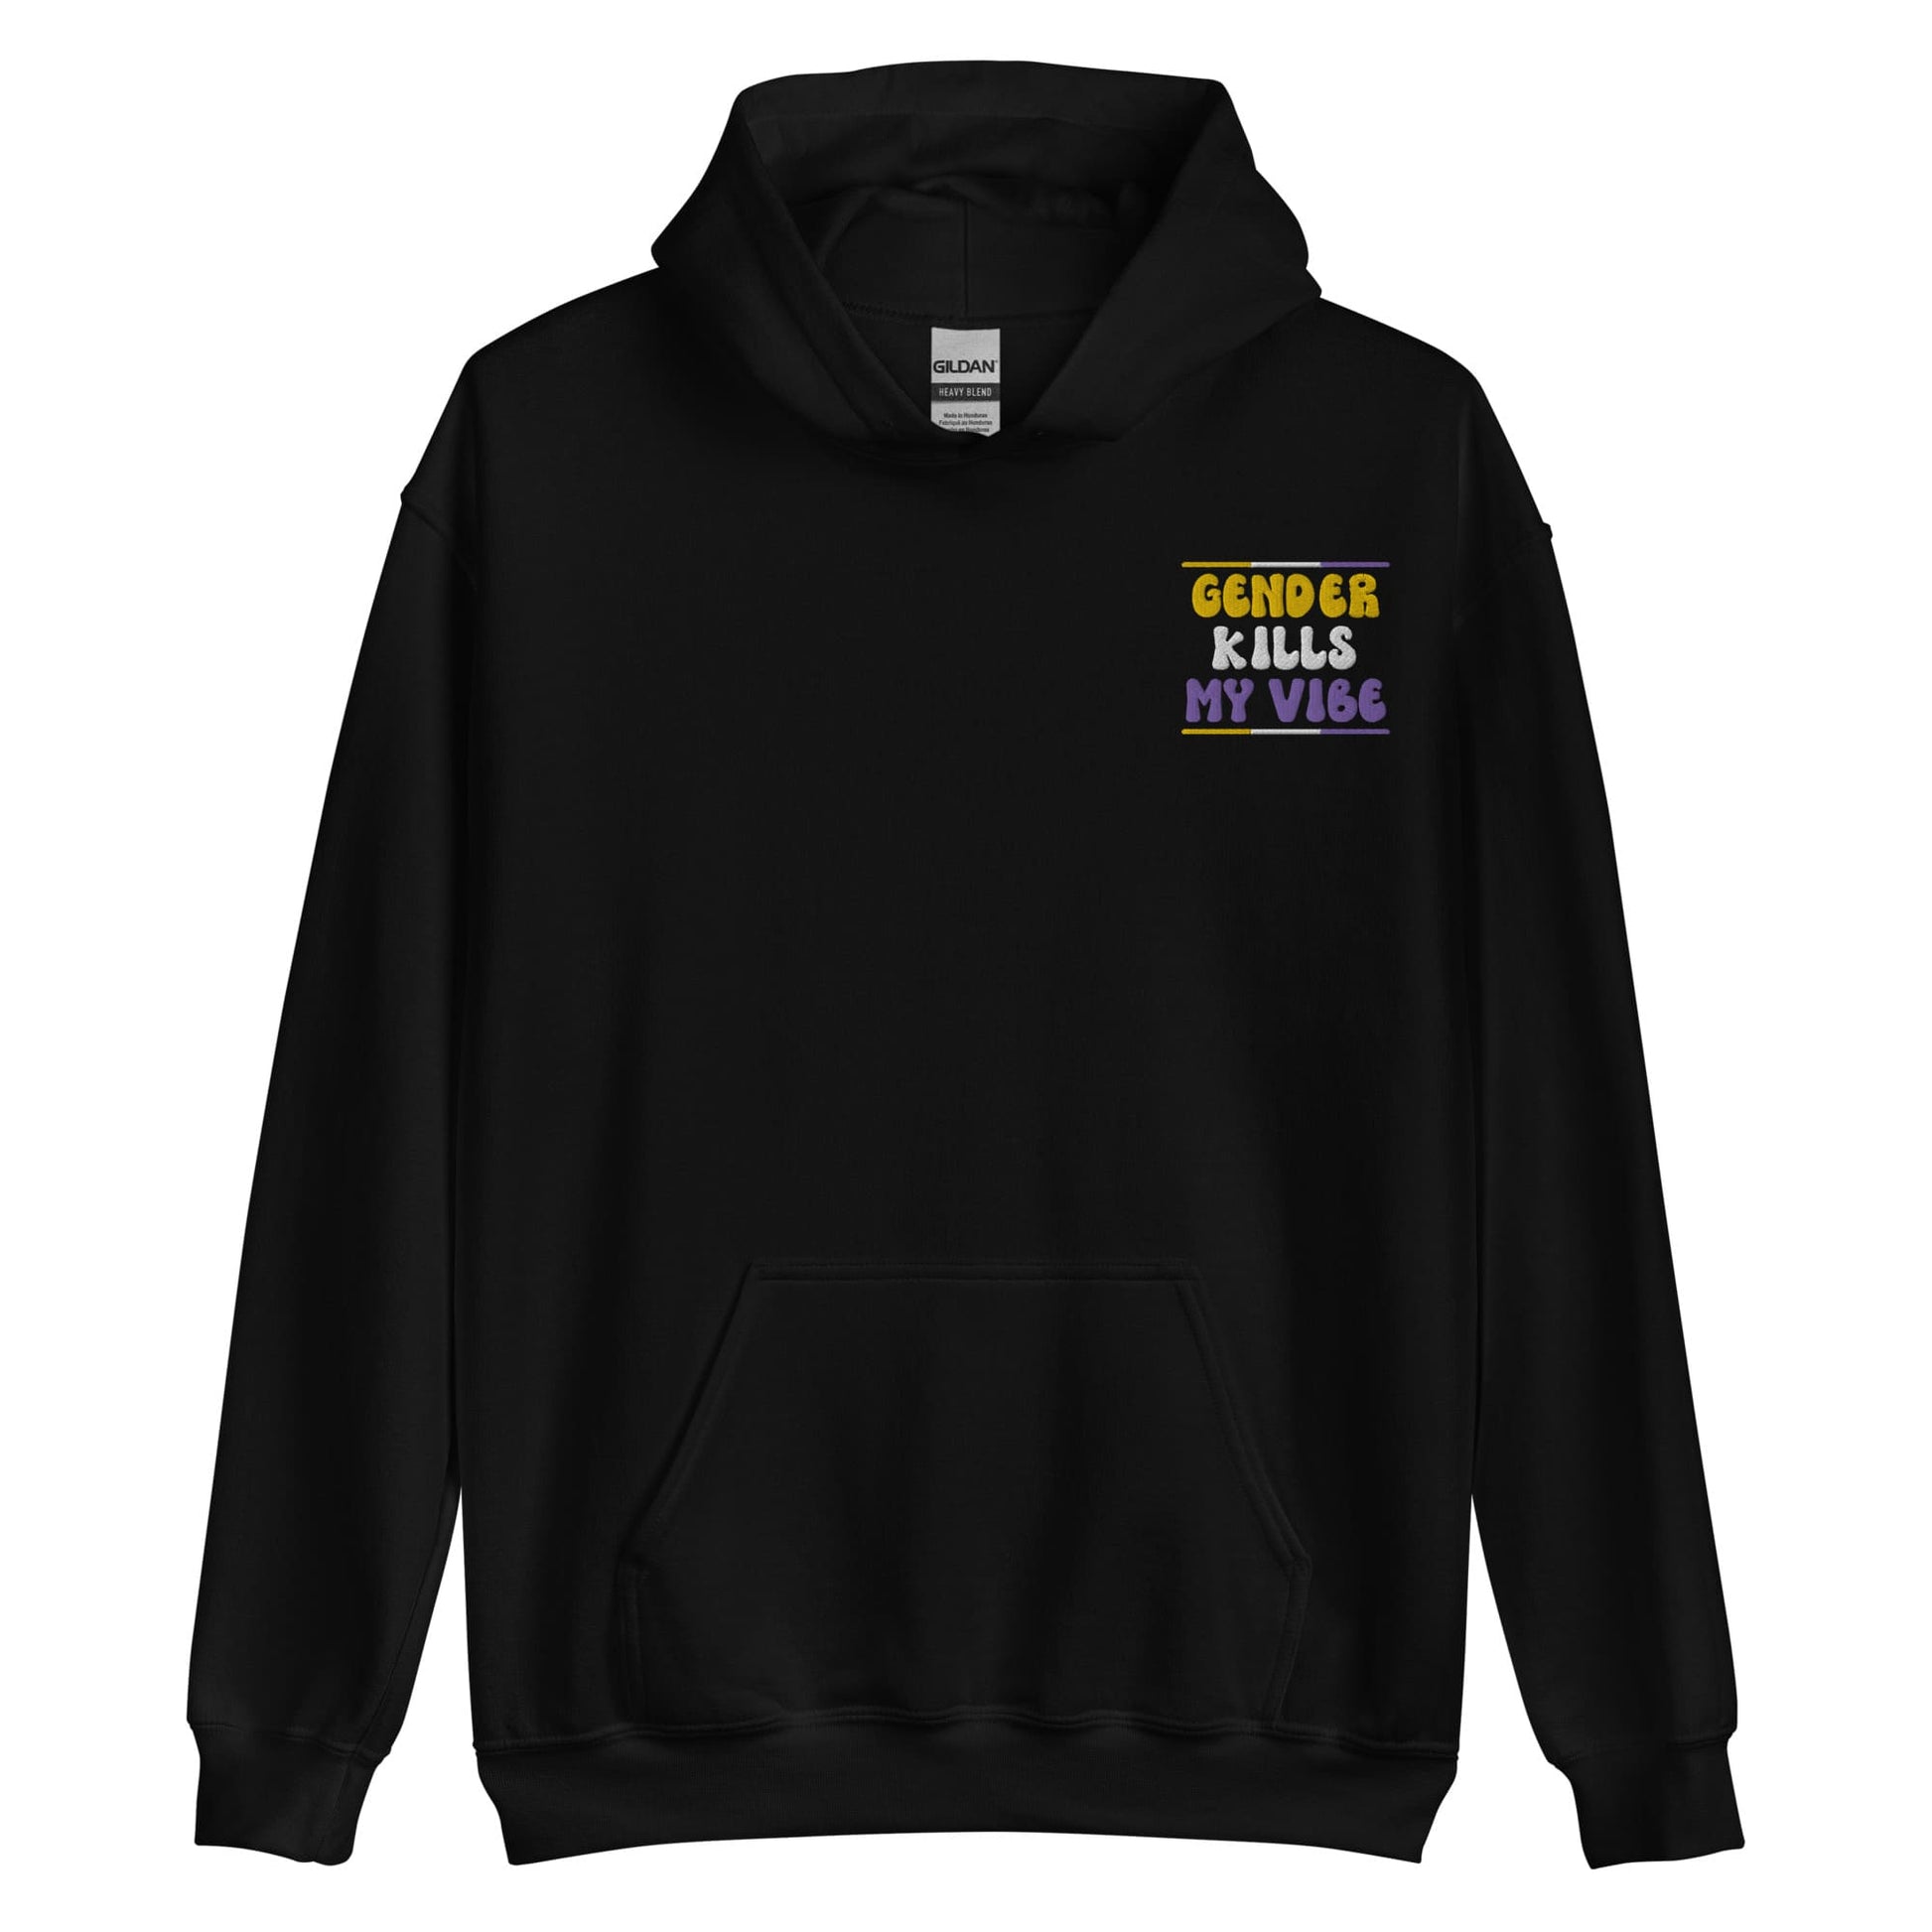 Gender kills my vibe nonbinary hoodie, embroidery